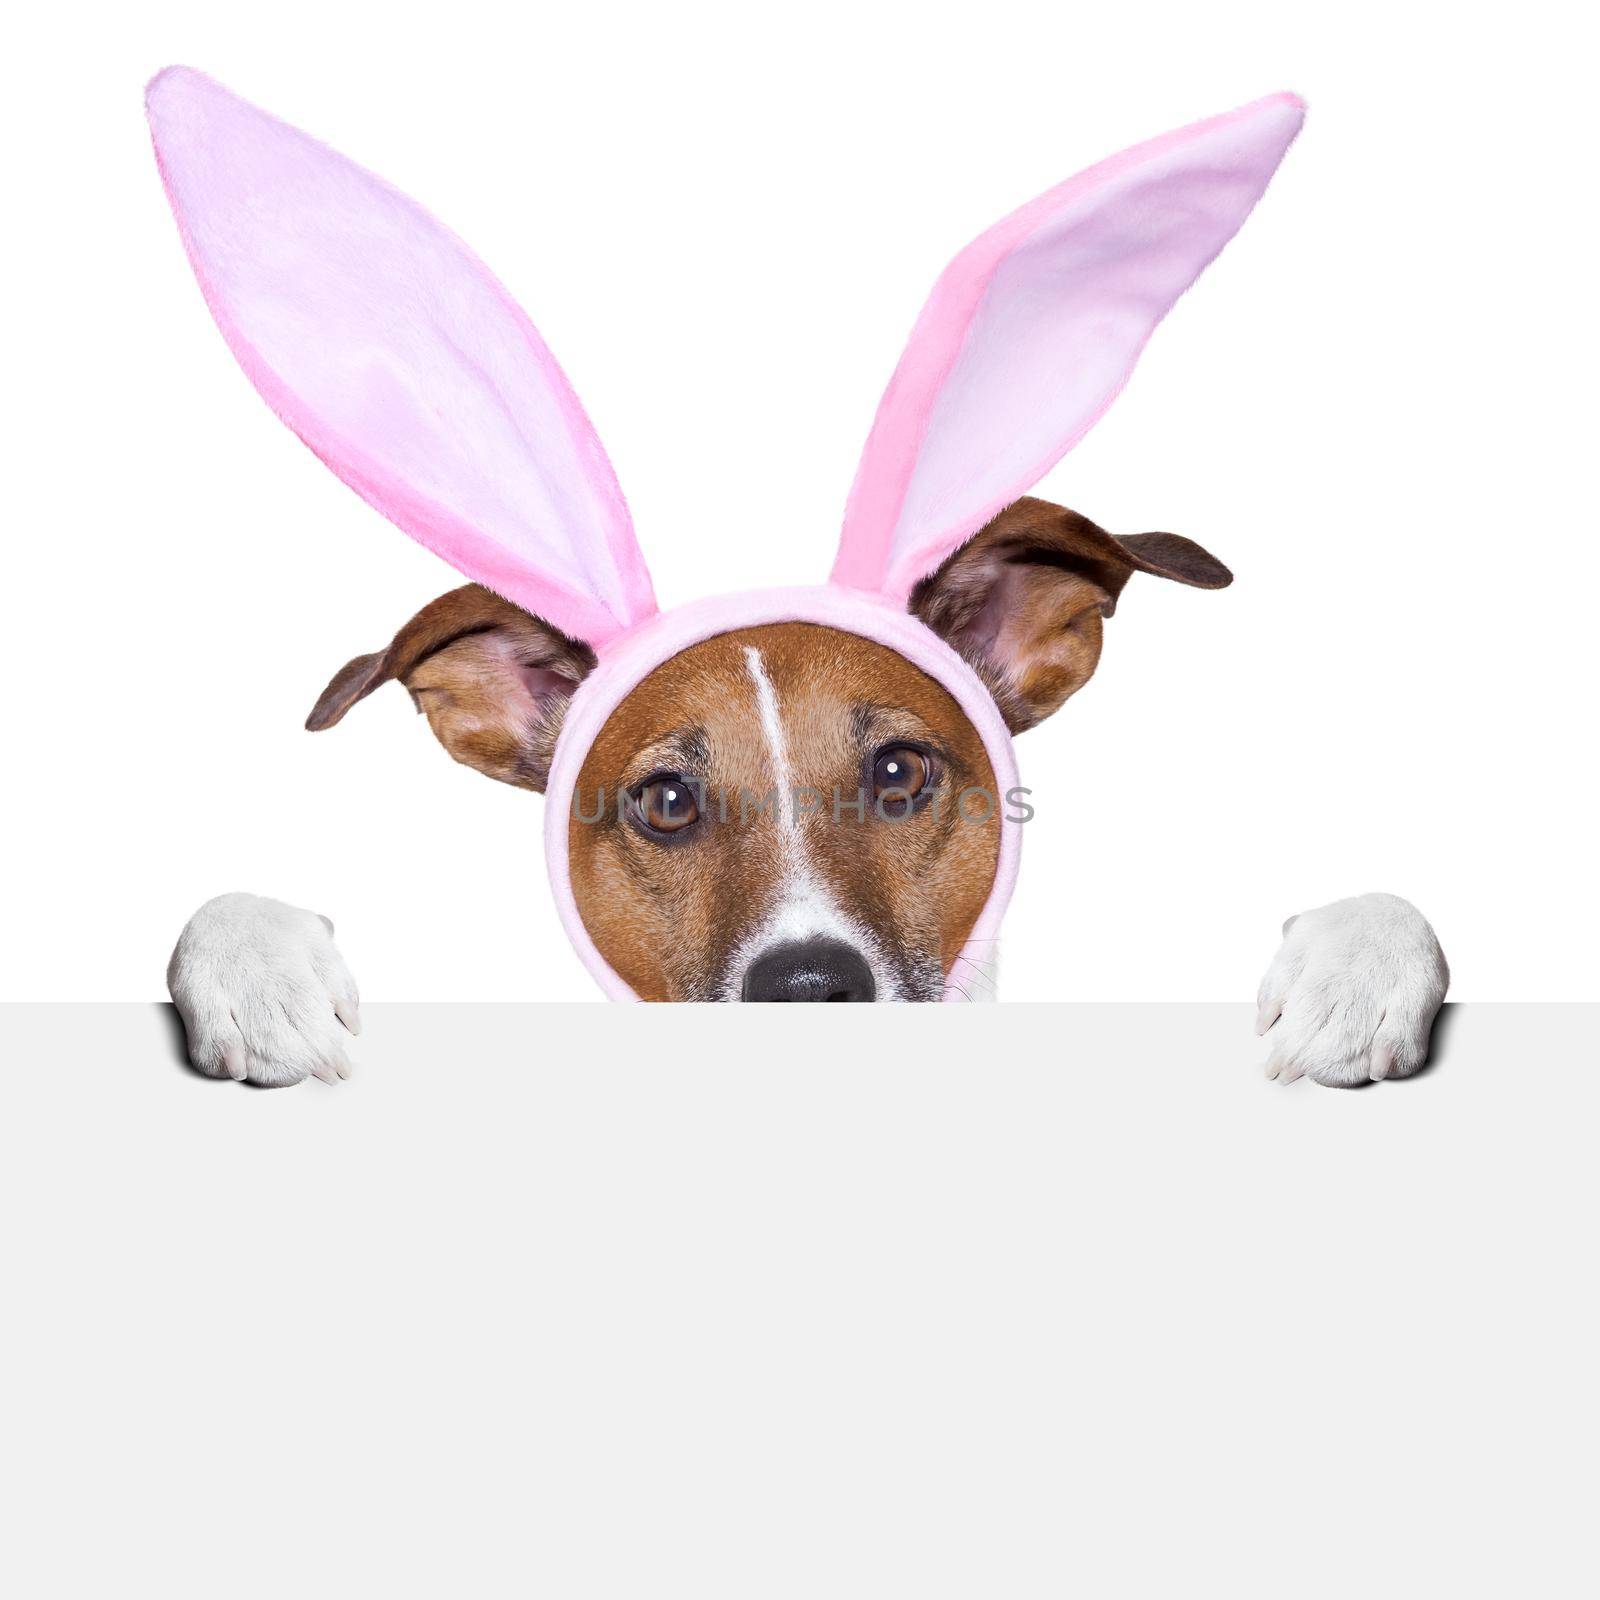  funny easter dog by Brosch